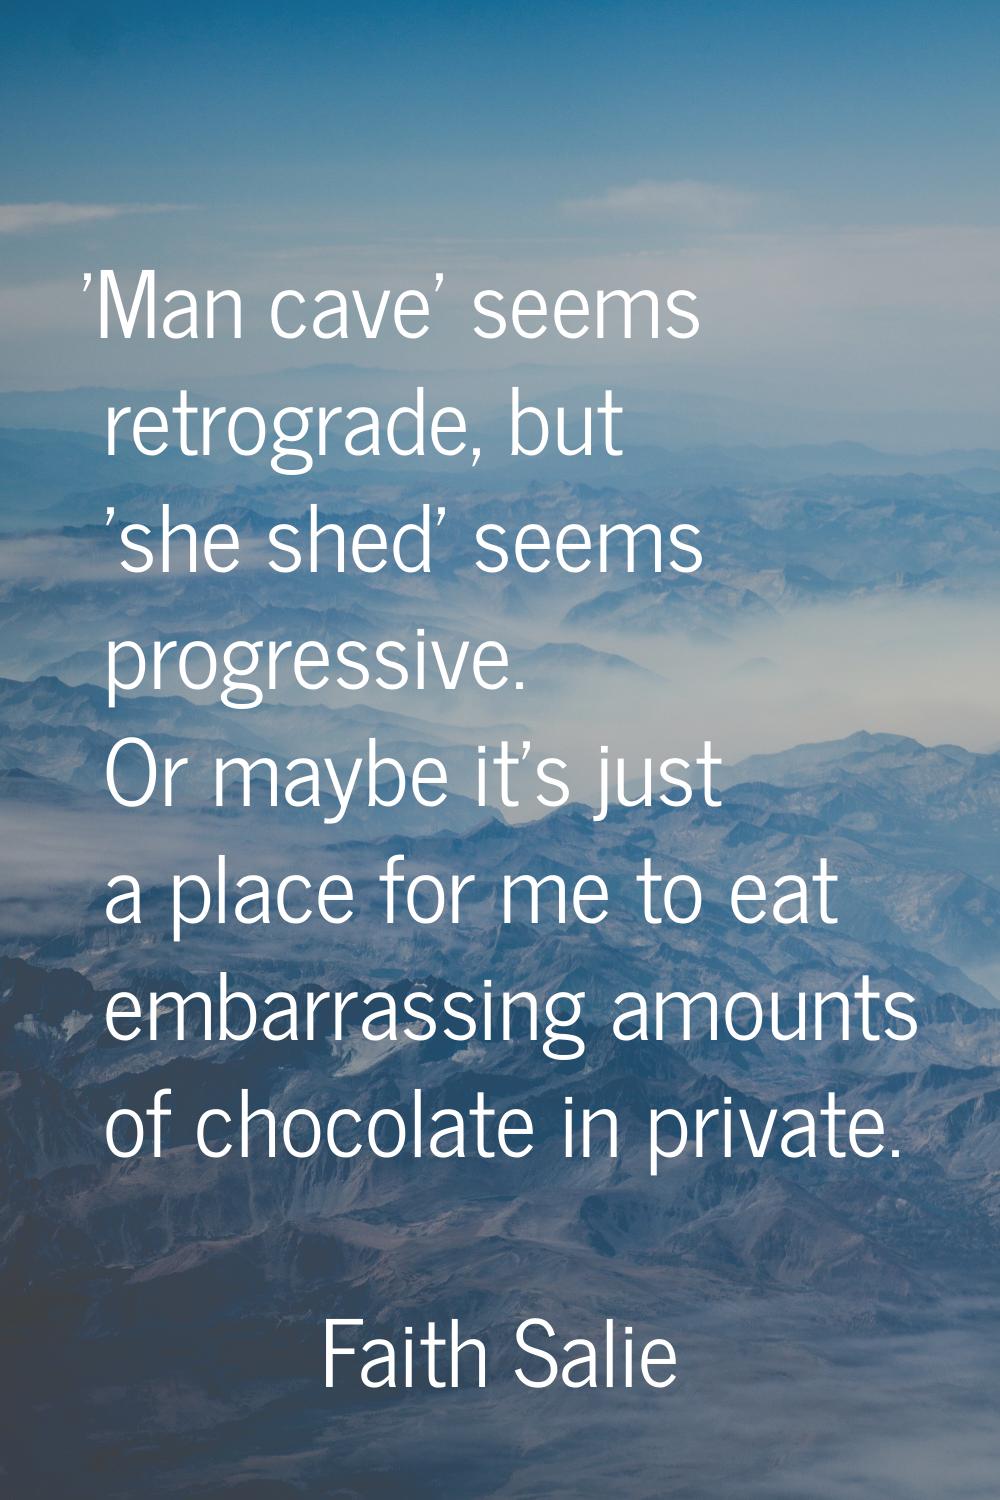 'Man cave' seems retrograde, but 'she shed' seems progressive. Or maybe it's just a place for me to